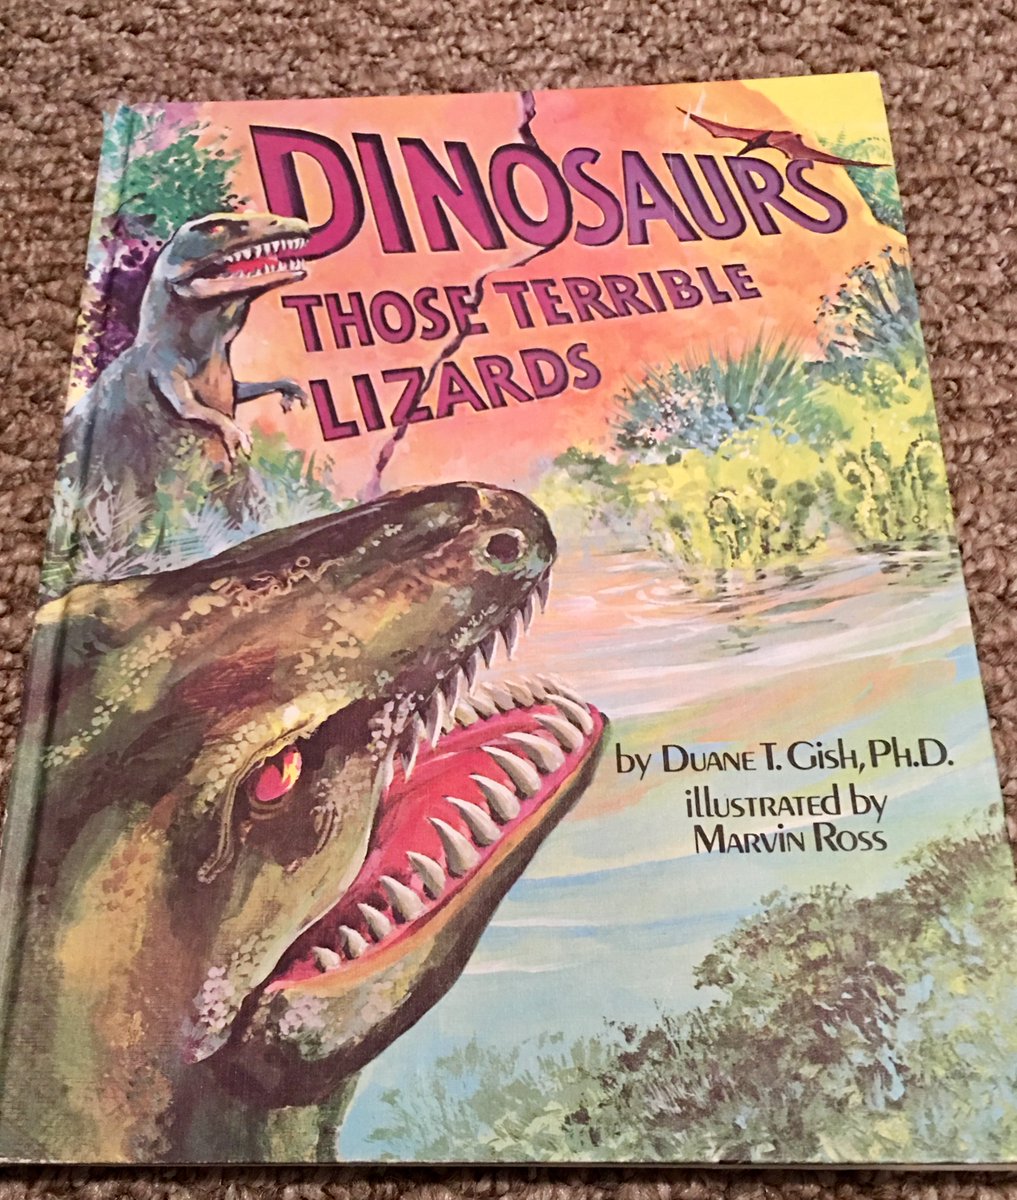 2. This is going to be a primary-source-based thread focusing on the evangelical children's book Dinosaurs: Those Terrible Lizards, by creationist Duane T. Gish, who got a Ph.D. in biochemistry from Berkeley in 1953 and died in 2013. But before I dive into it, some background.